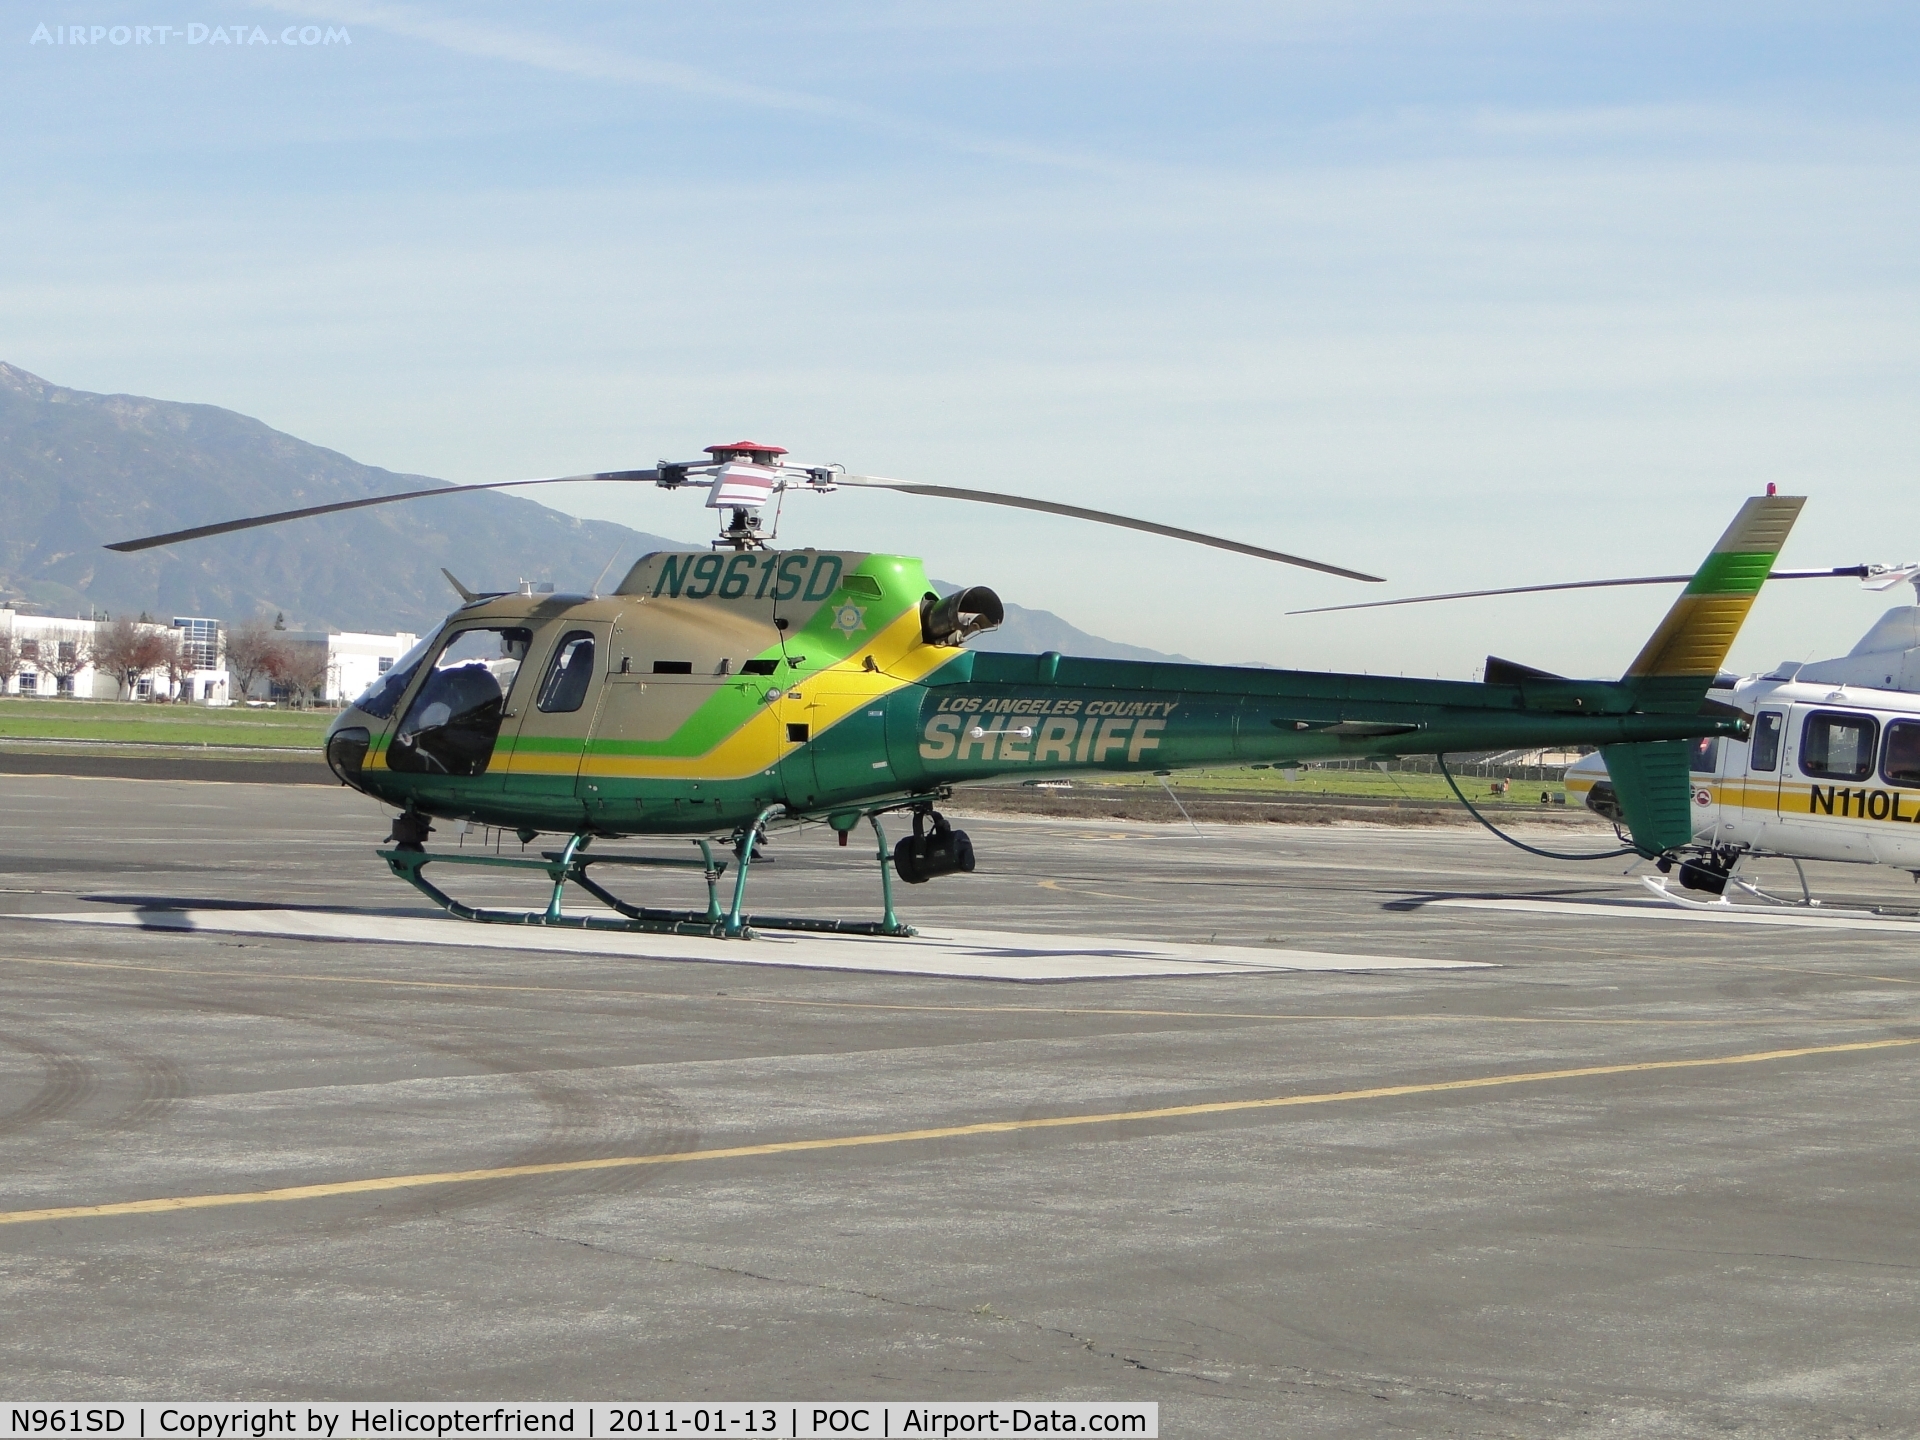 N961SD, 2001 Eurocopter AS-350B-2 Ecureuil Ecureuil C/N 3516, Parked at the LACO Sheriff helipad